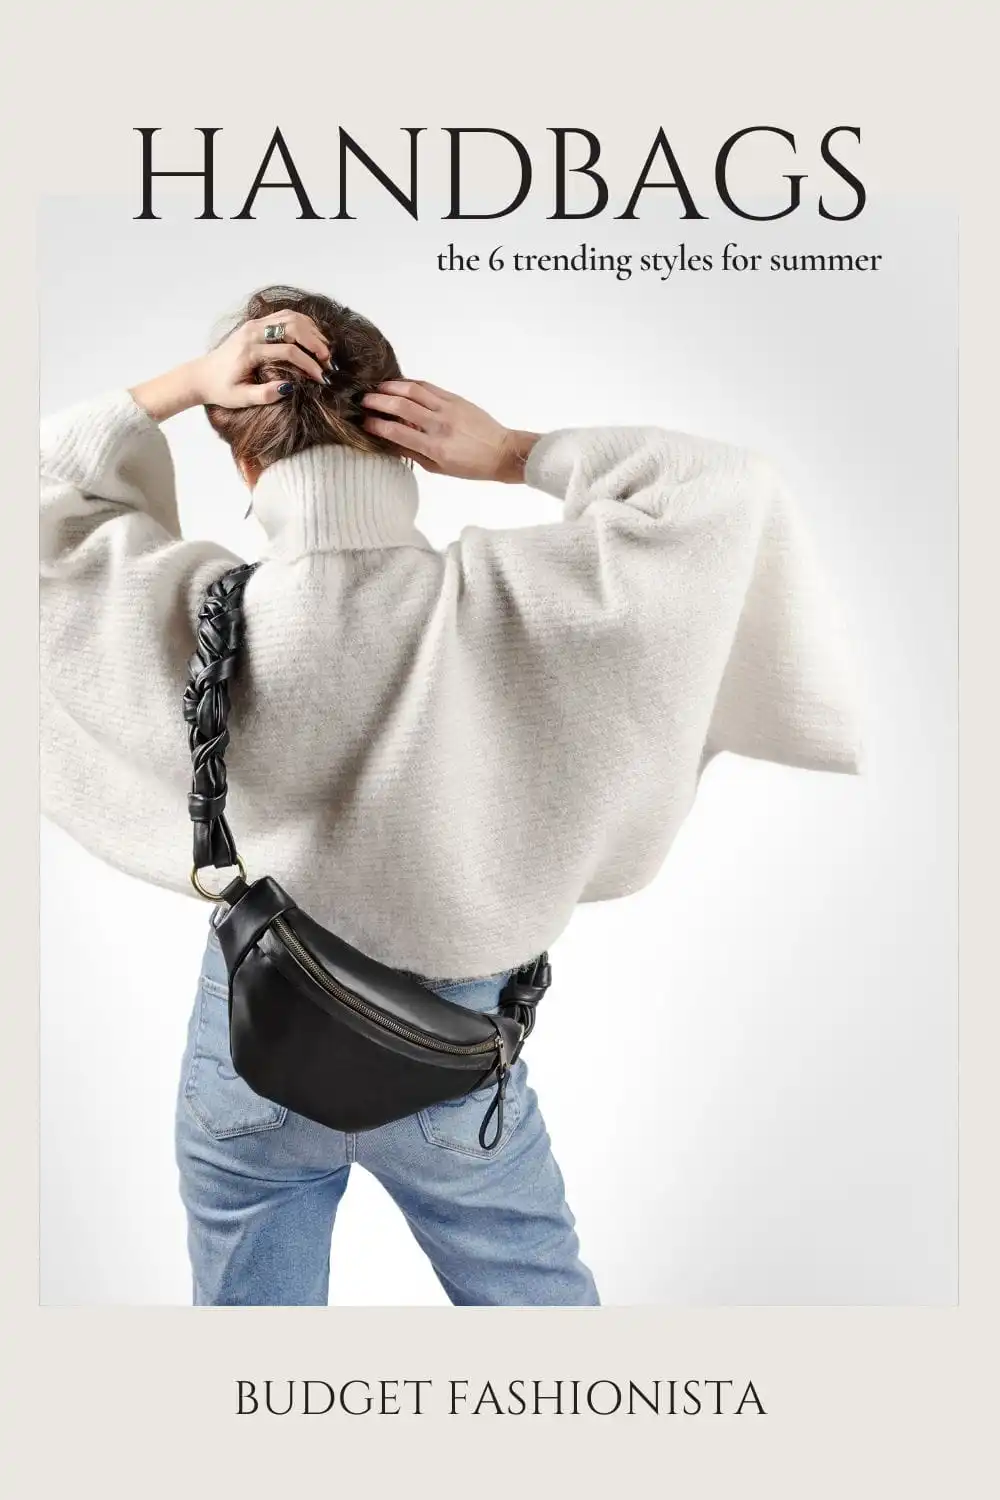 View from behind of woman wearing crossbody bag.